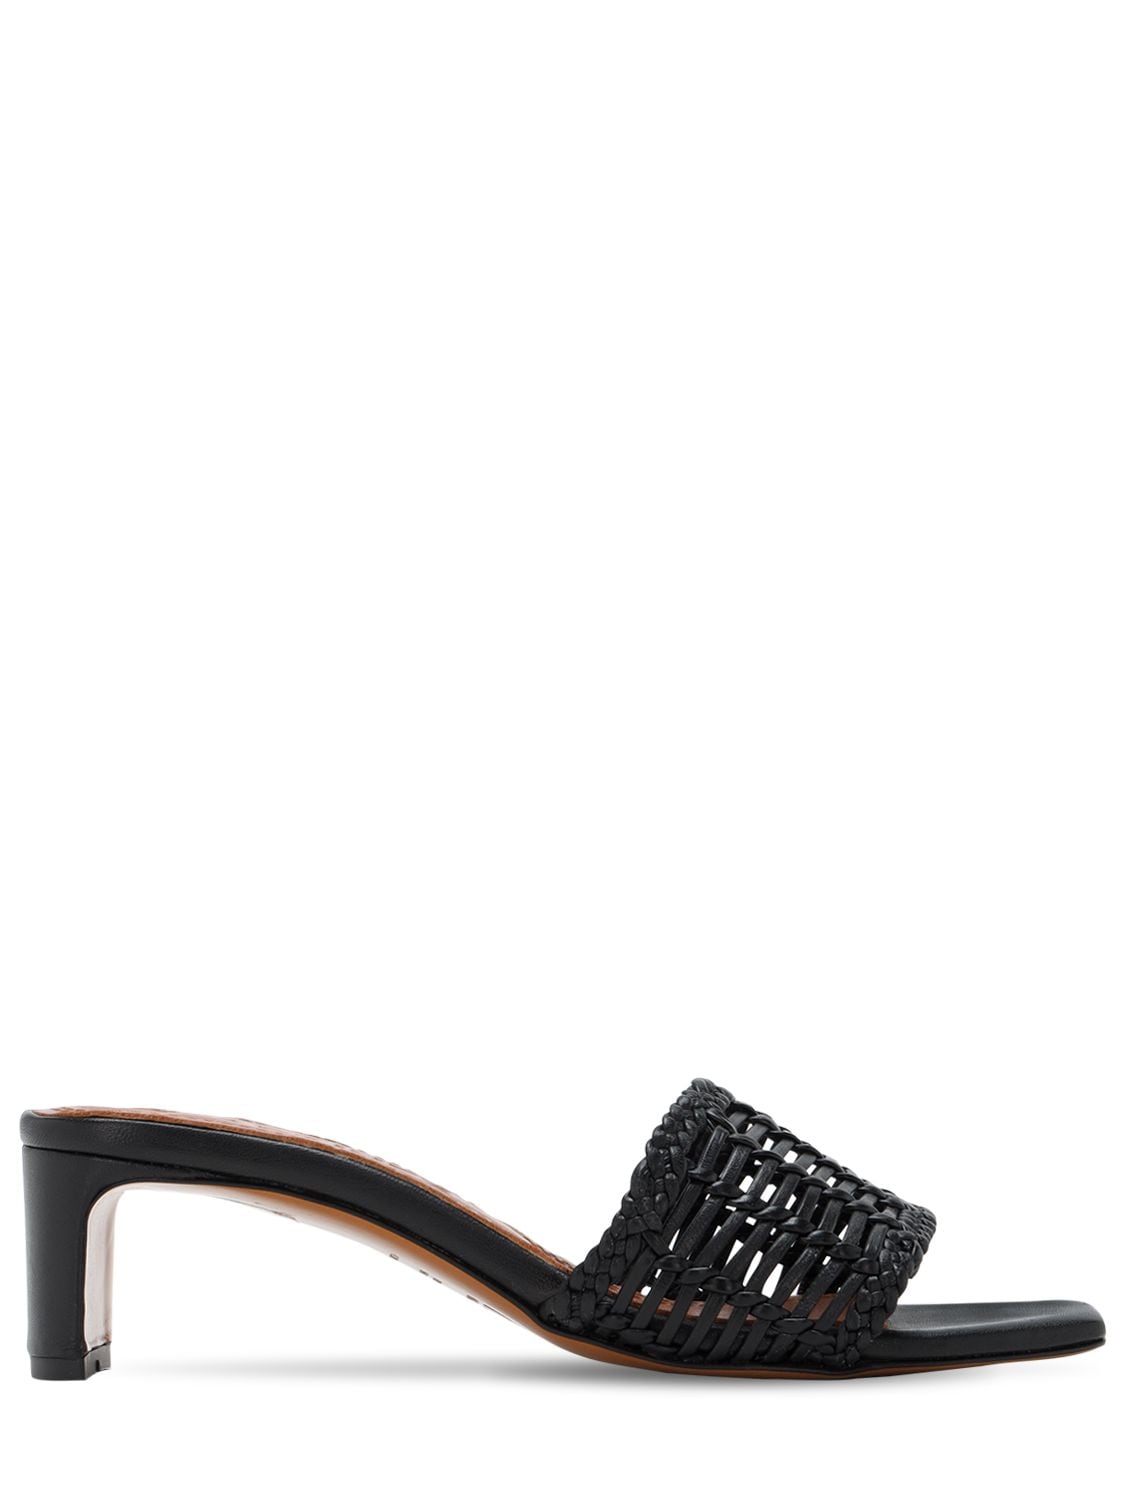 Souliers Martinez 50mm Woven Leather Sandals In Black